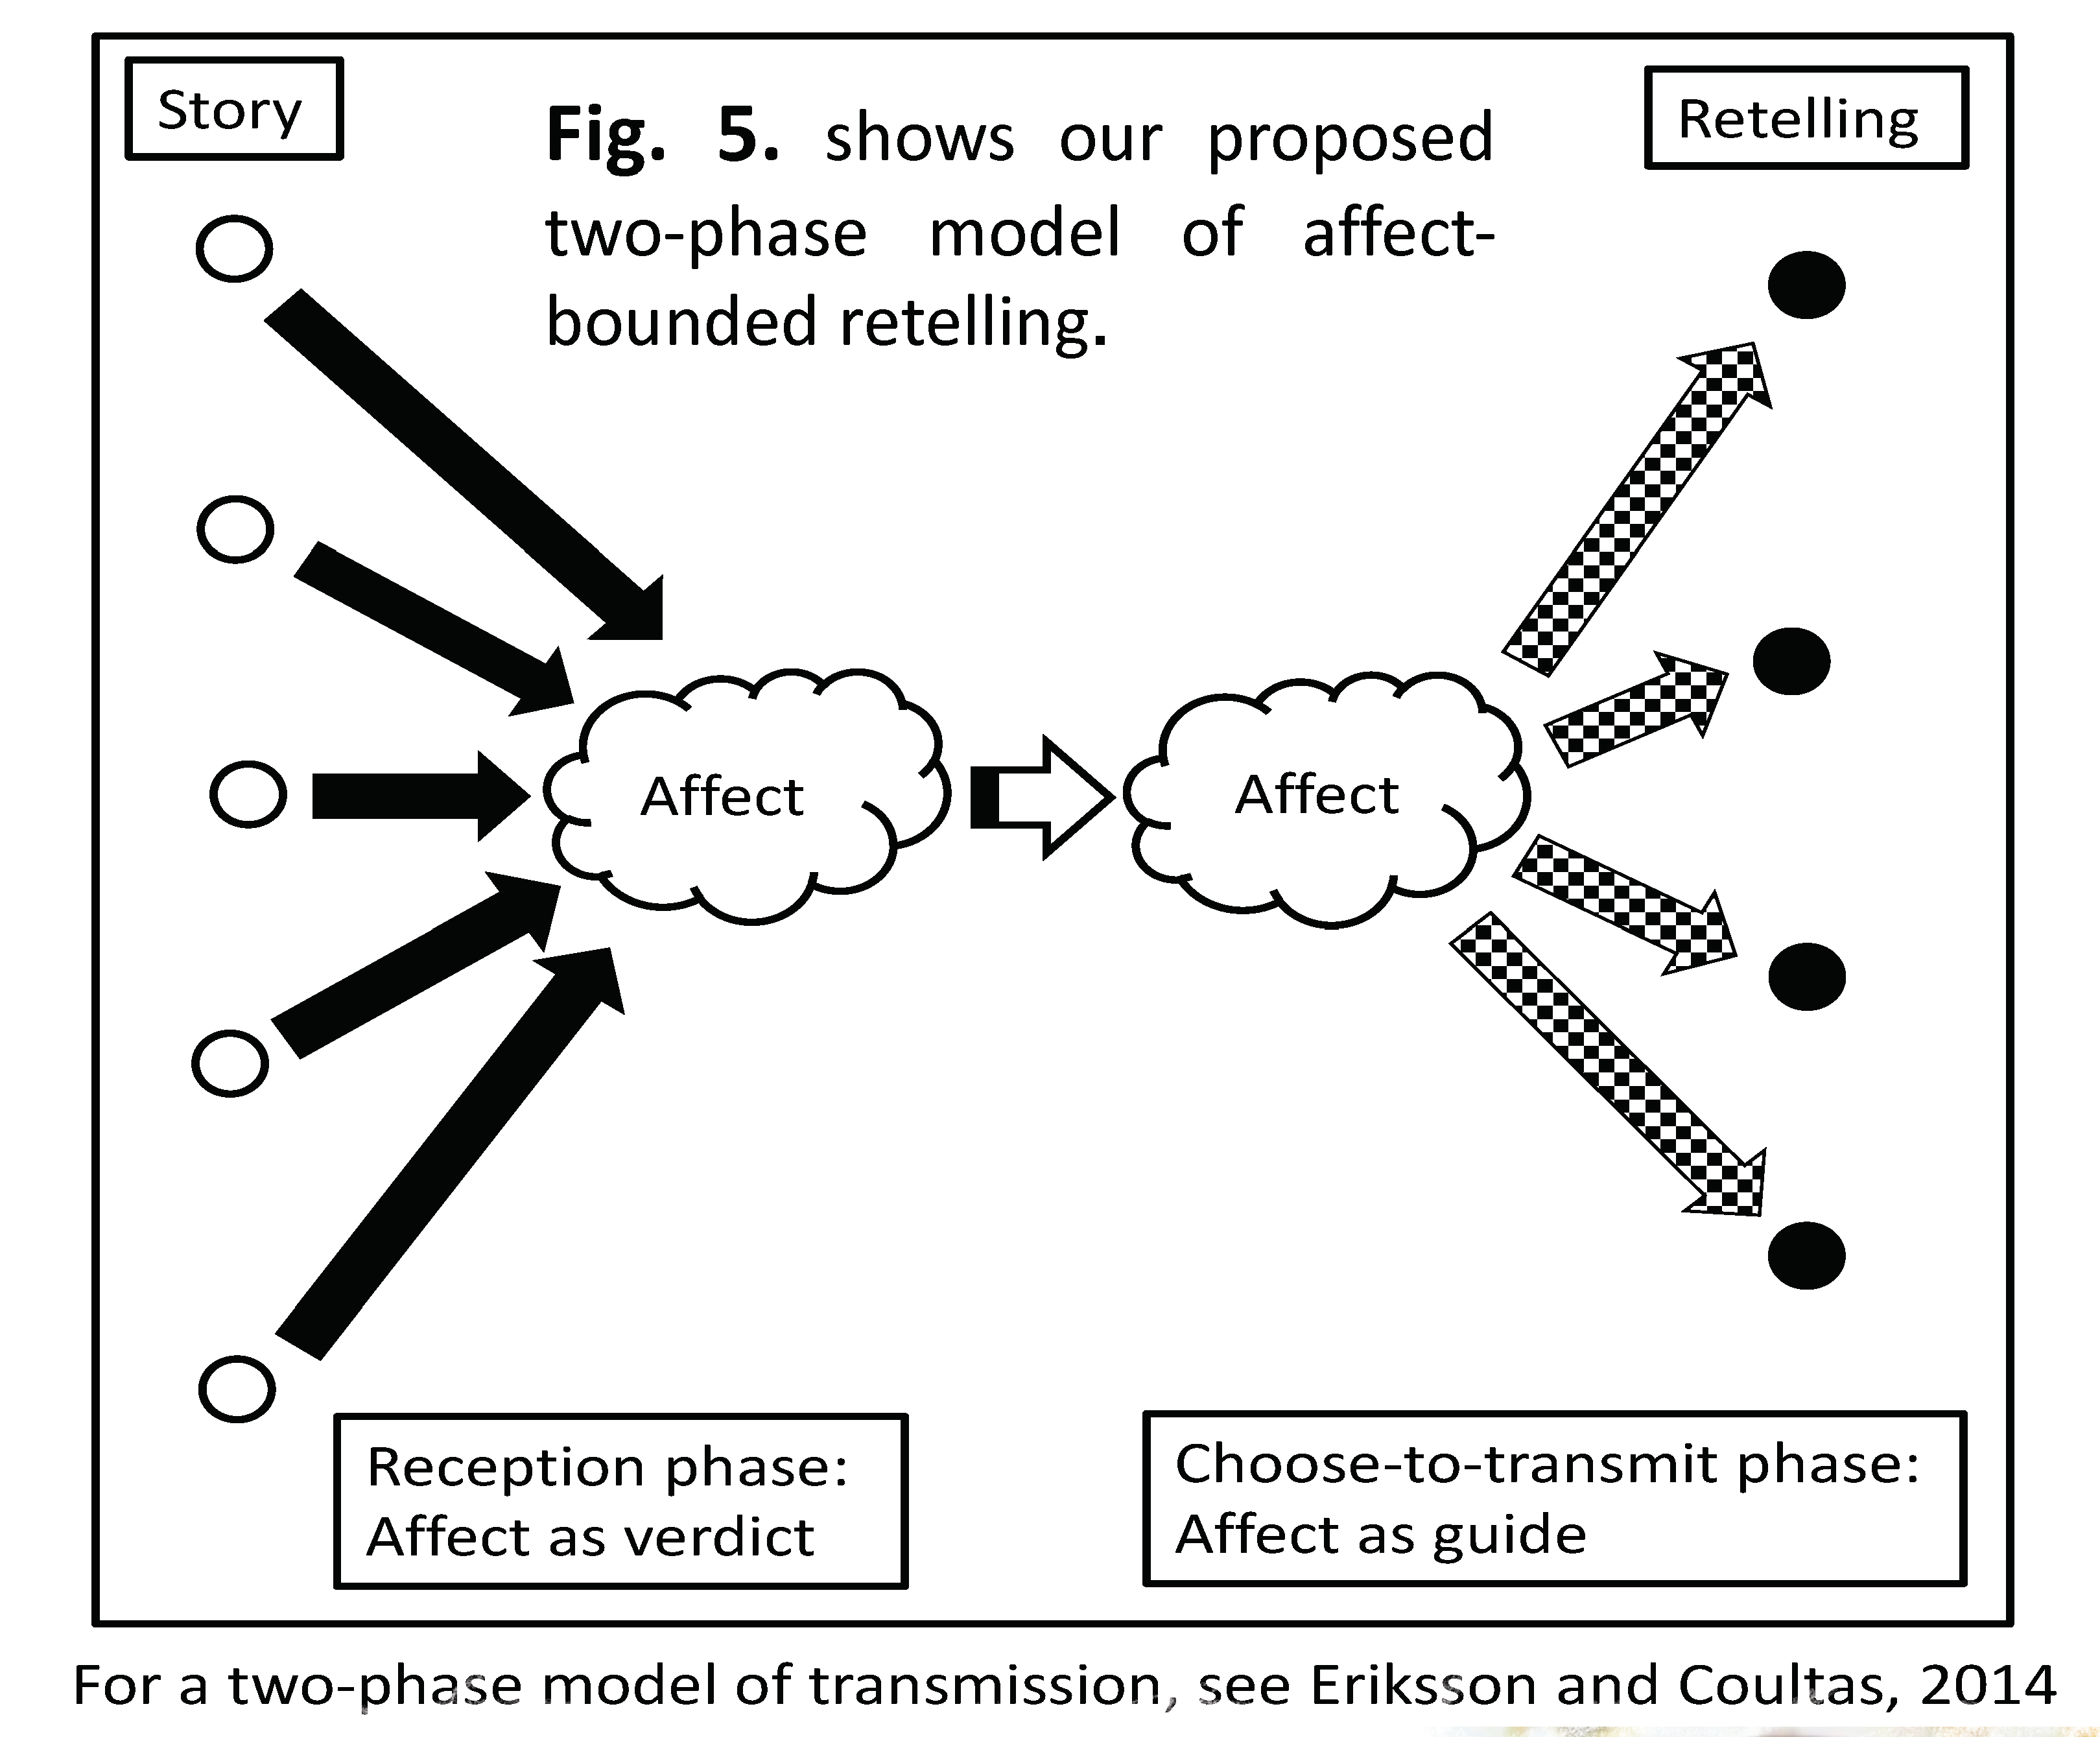 Figure 5: shows proposed two-phased model of affect-bounded retelling